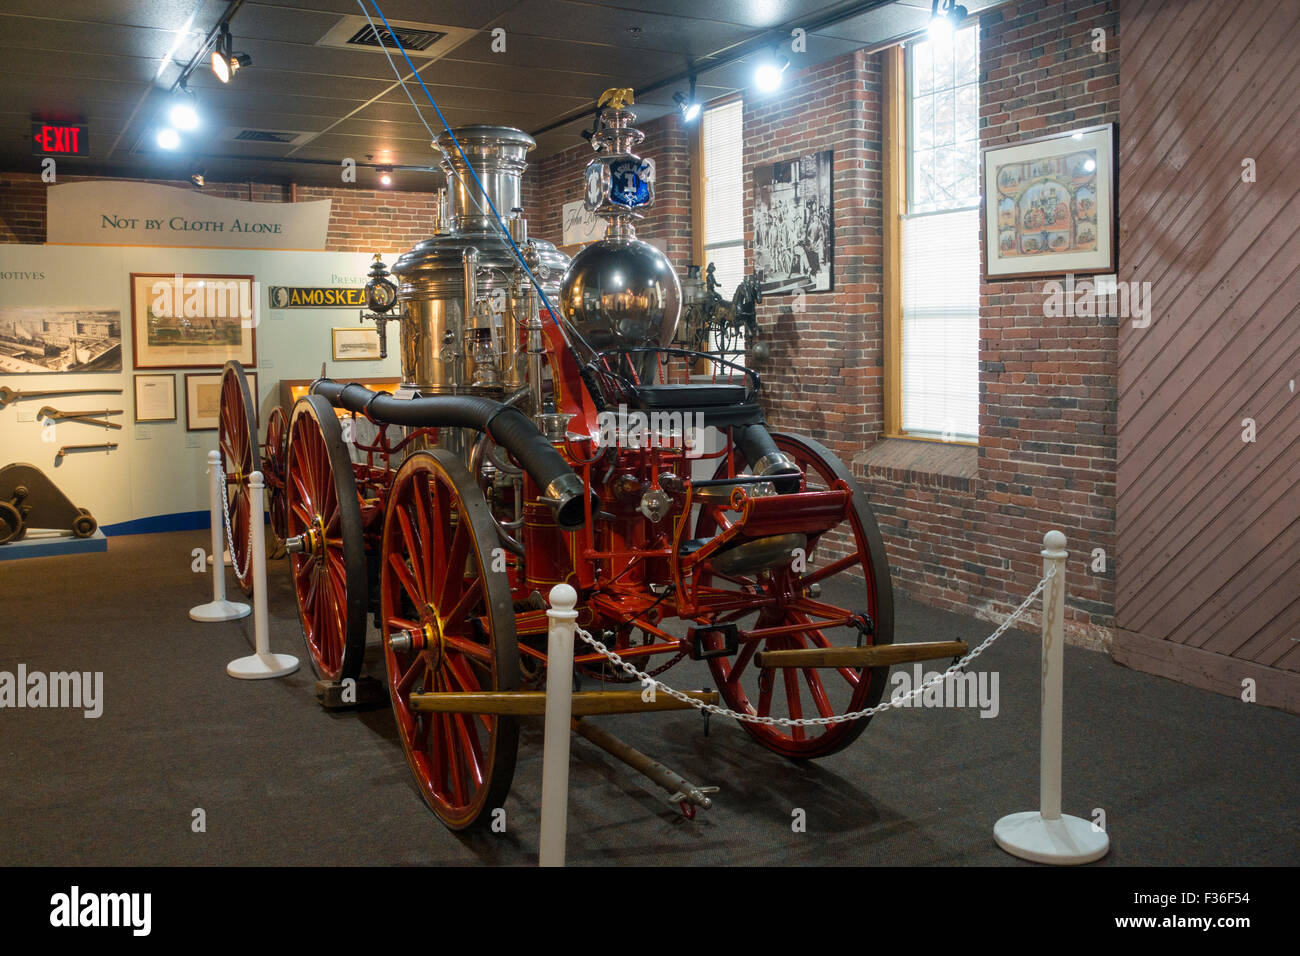 Millyard museum Manchester New Hampshire mill yard Banque D'Images